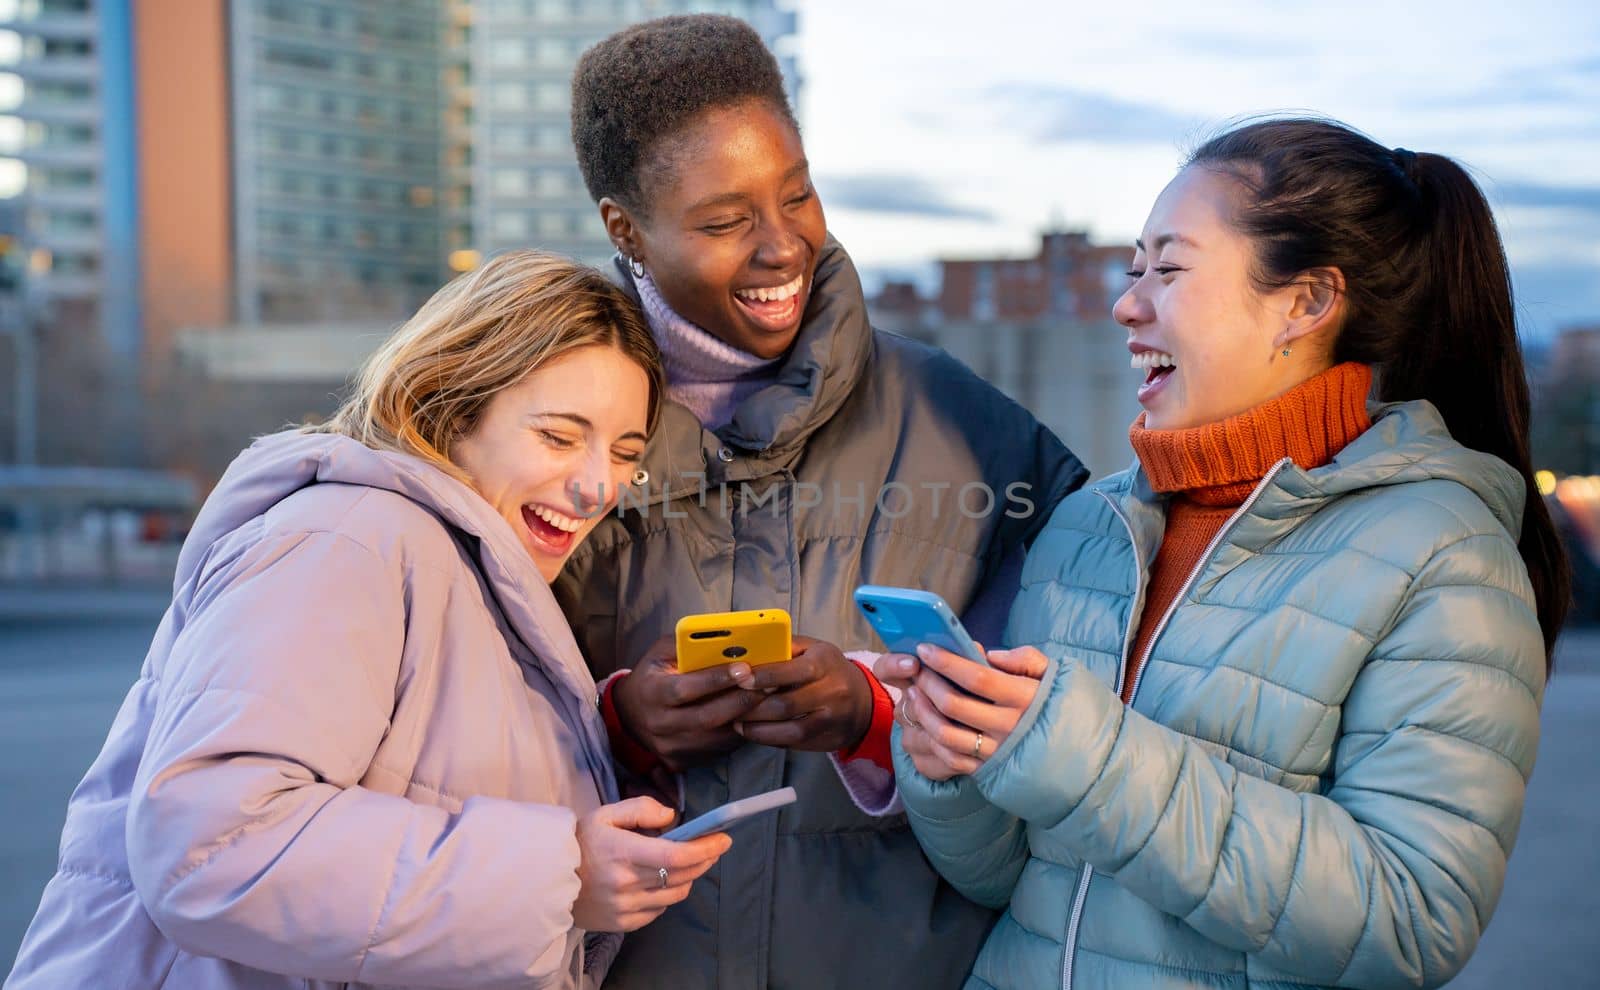 Cheerful female friends using cell phones and laughing in the city. Technology addicted concept by PaulCarr